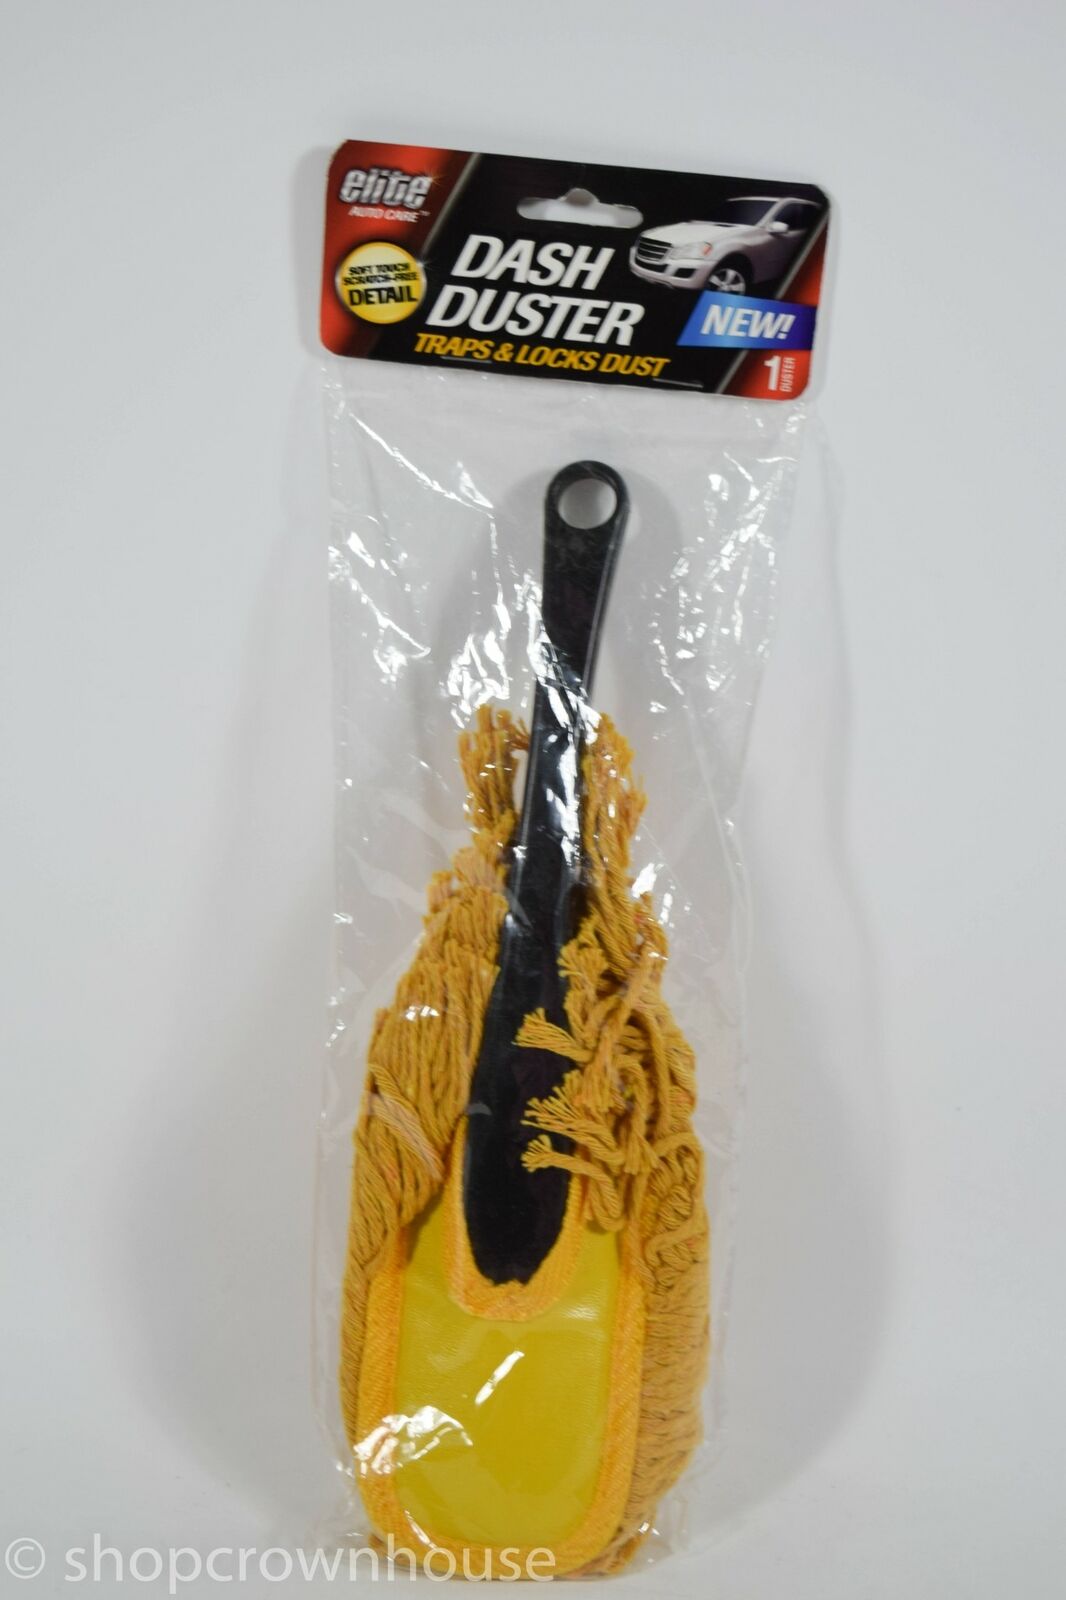 1 Elite Auto Care Dash Duster New Soft Touch Scratch-free Raps And Locks Dust